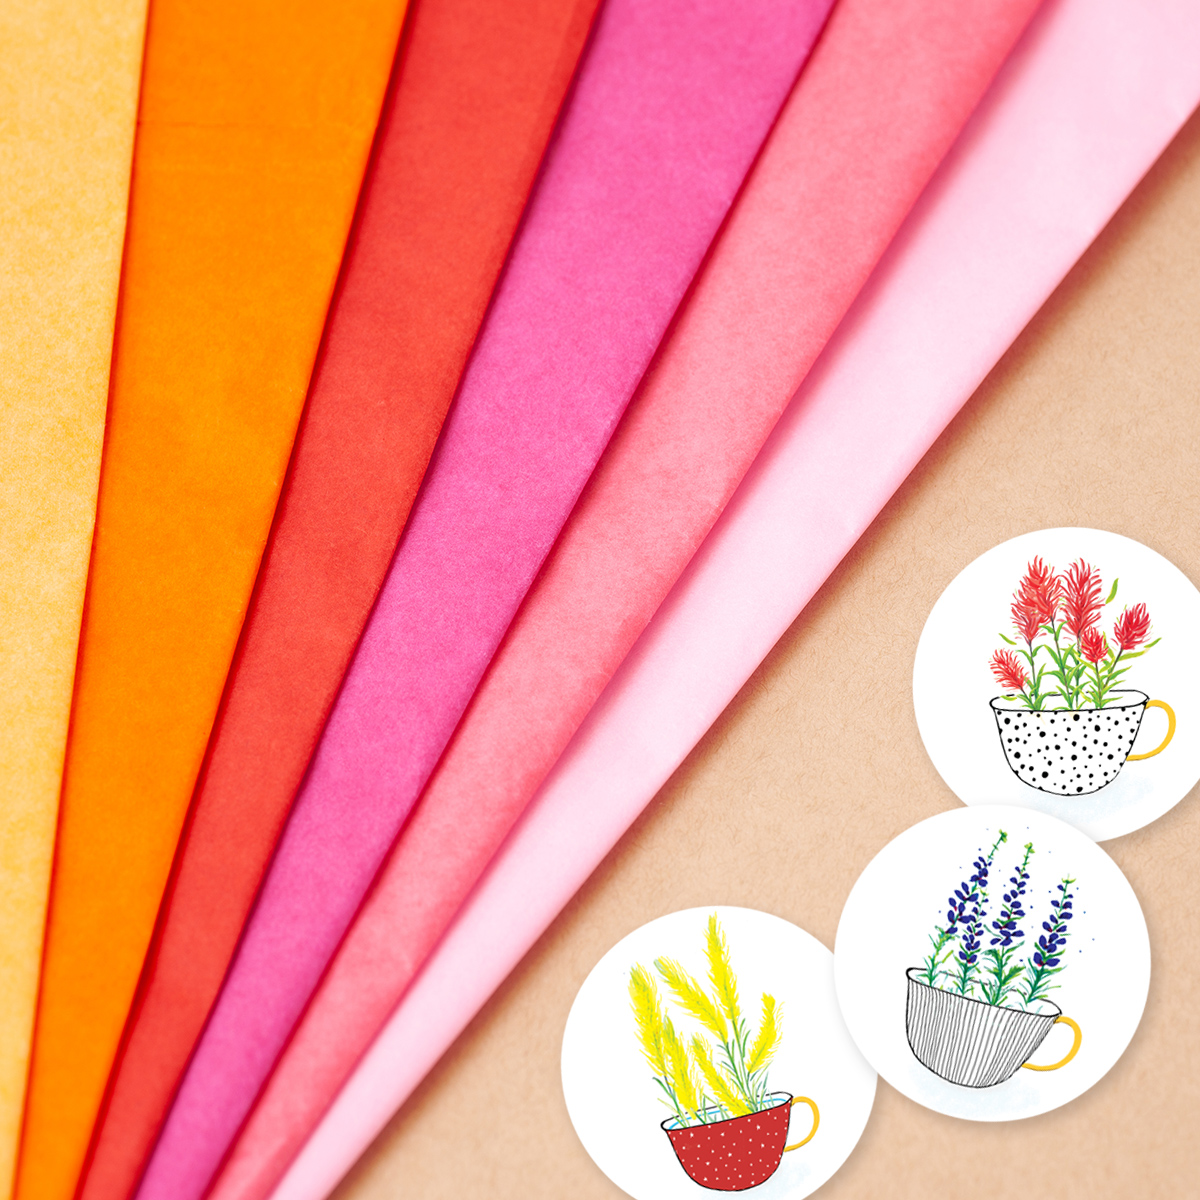 image shows tissue paper in branded colors next to flower stickers in same branding palette, a great strategy for product packaging using color.